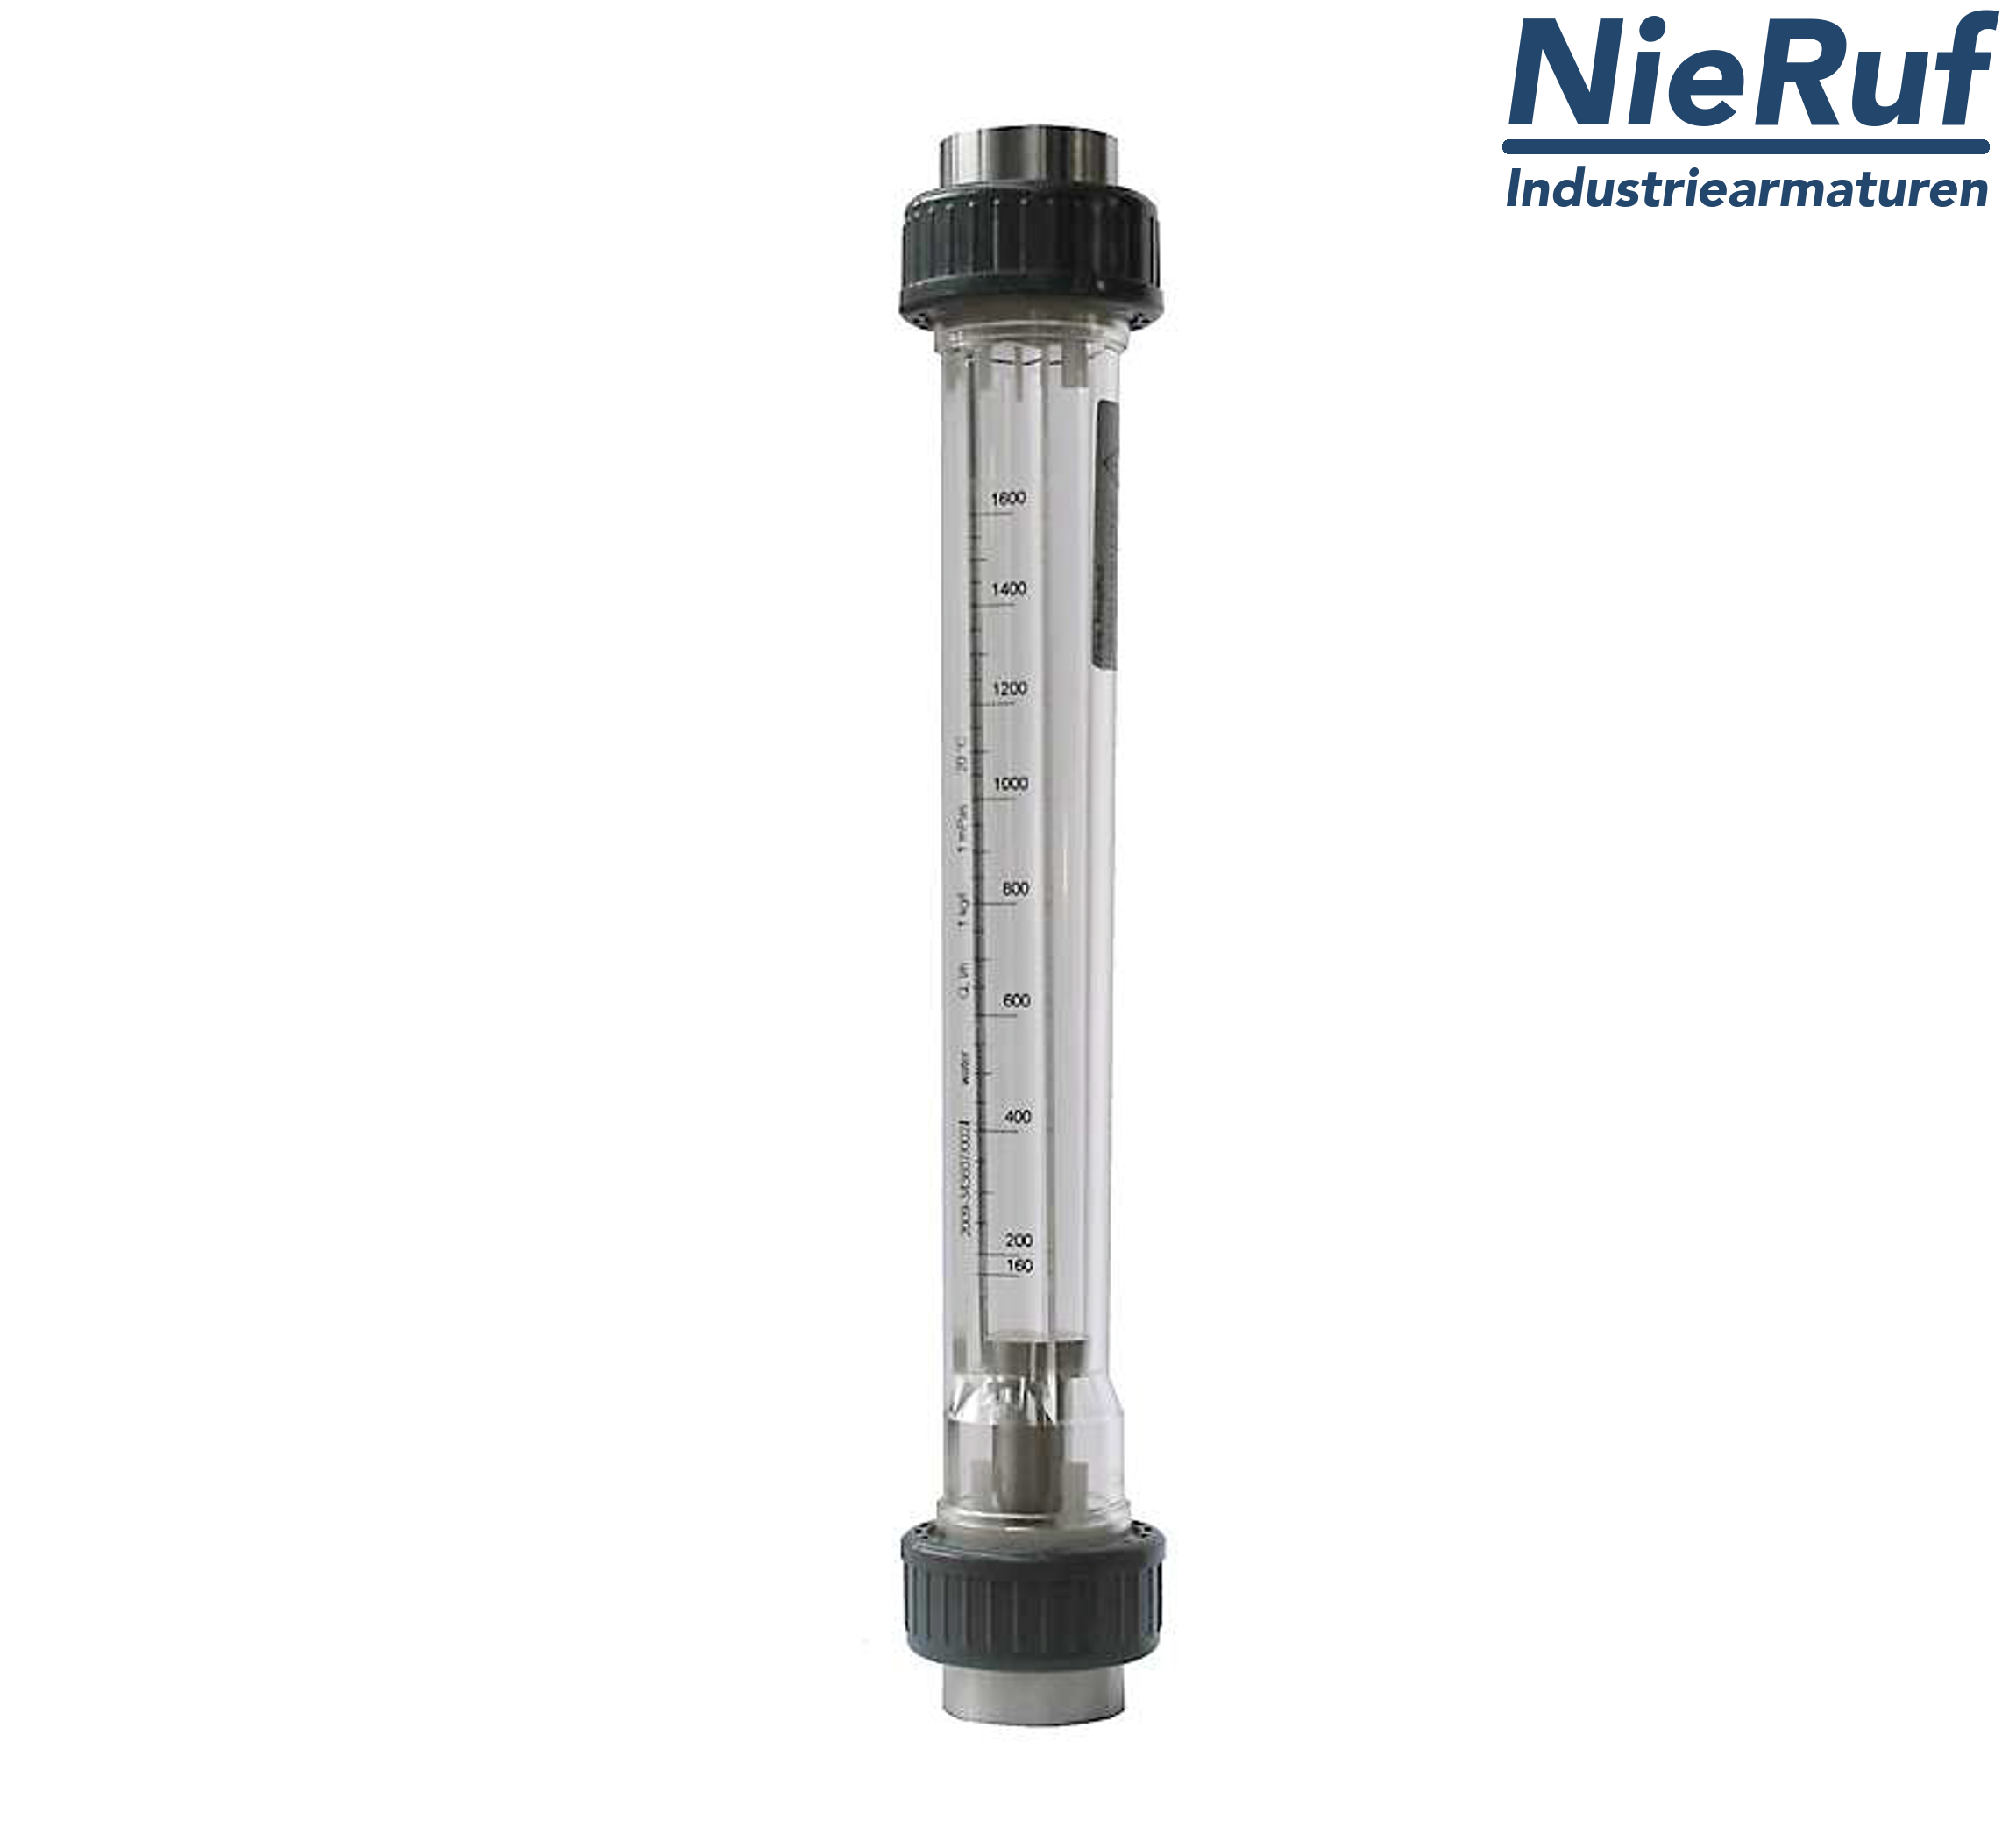 Variable area flowmeter 1 1/2" inch 6700.0 - 20000 l/h water FKM